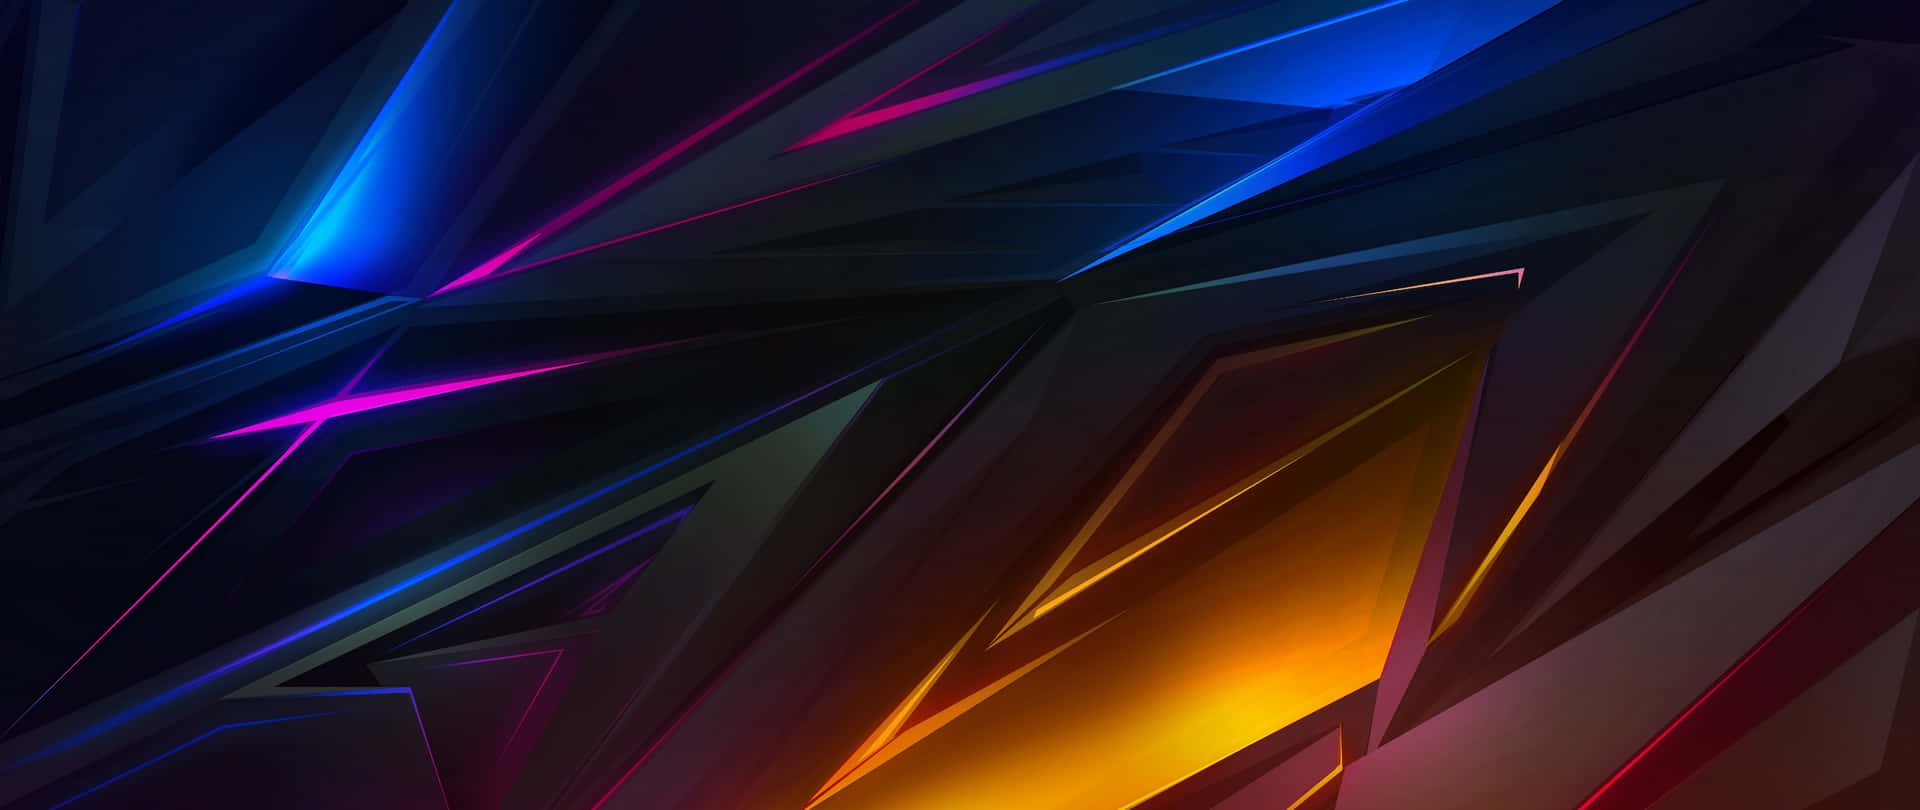 A Colorful Abstract Background With Colorful Lights Background